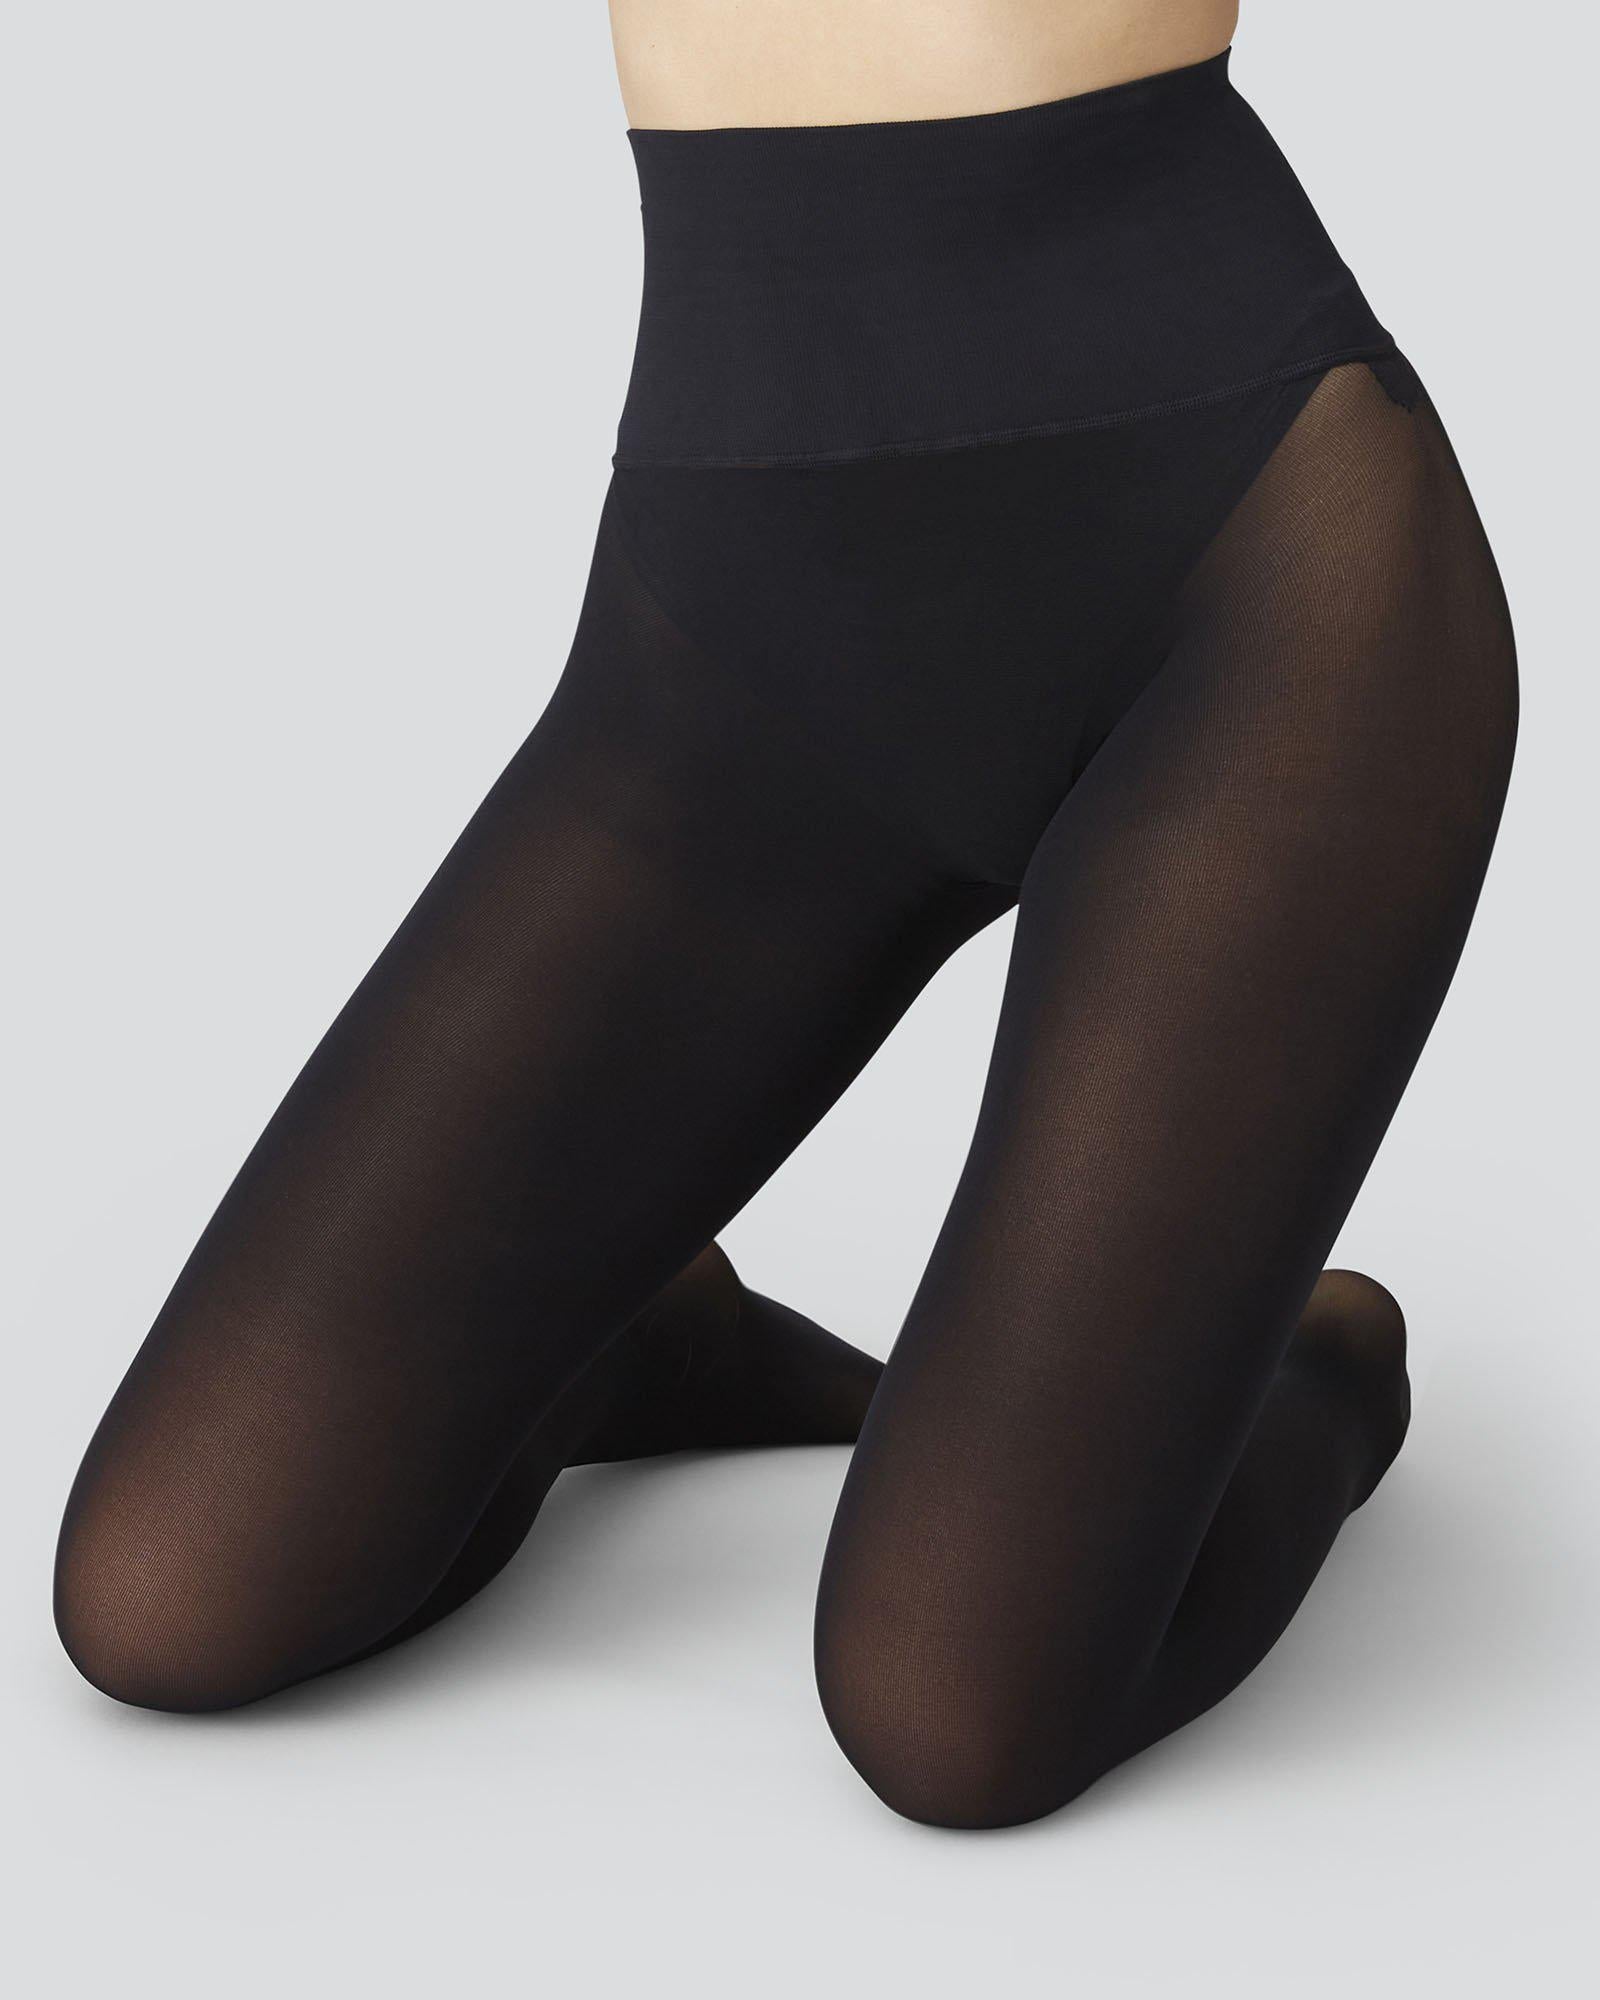 Buy Black Seamless 100 Denier Tights One Pack from Next Poland